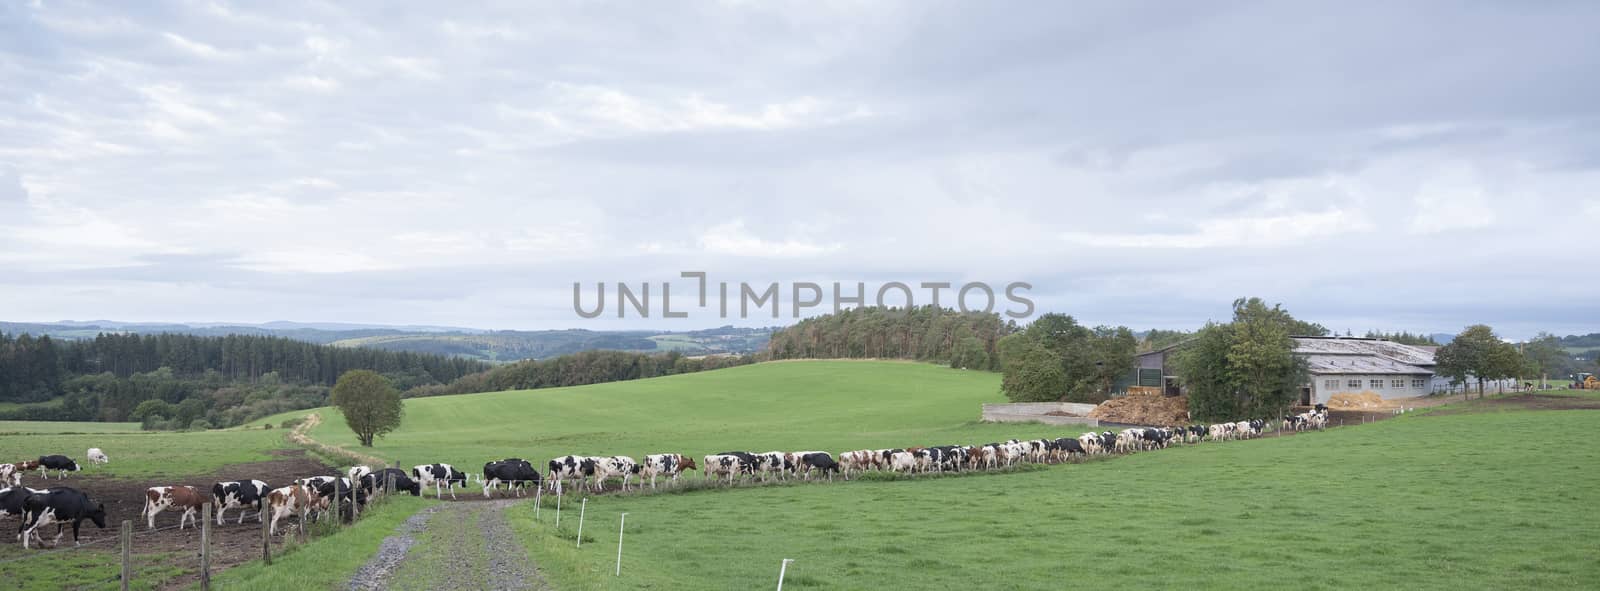 long row of cows in rural landscape of german vulkaneifel with forest in the background